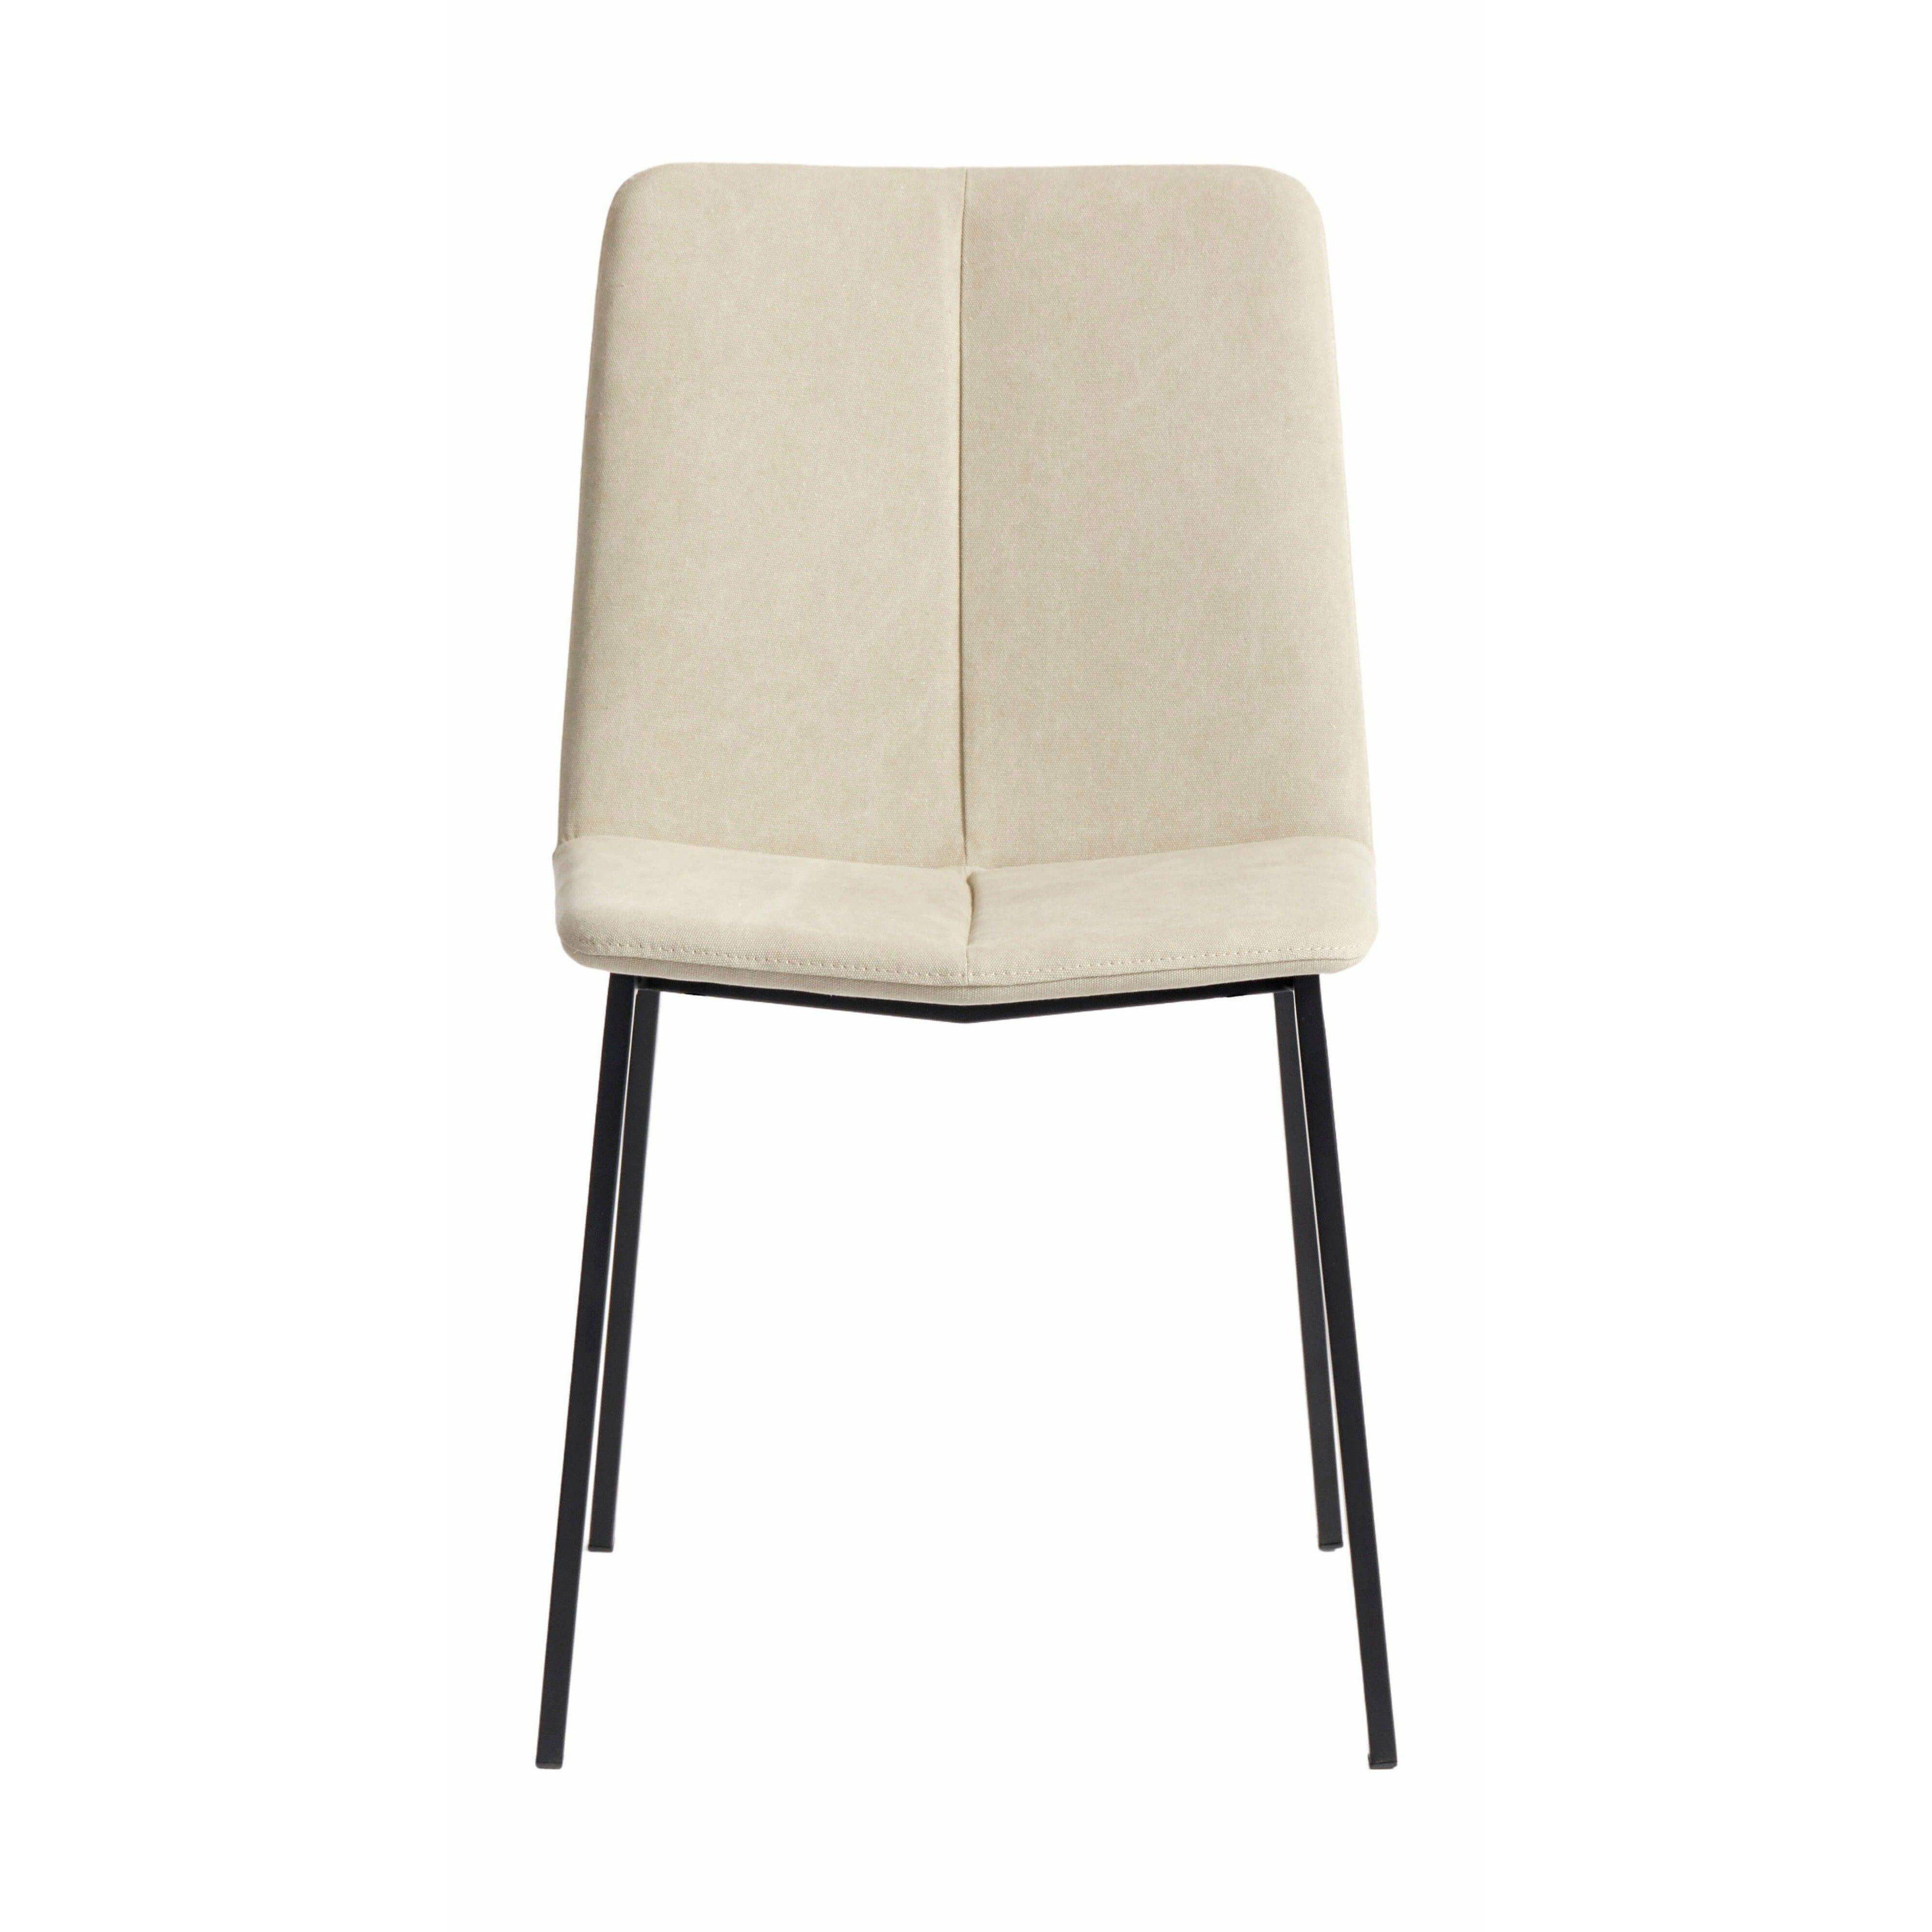 Muubs Chamfer Dining Chair, Wüste